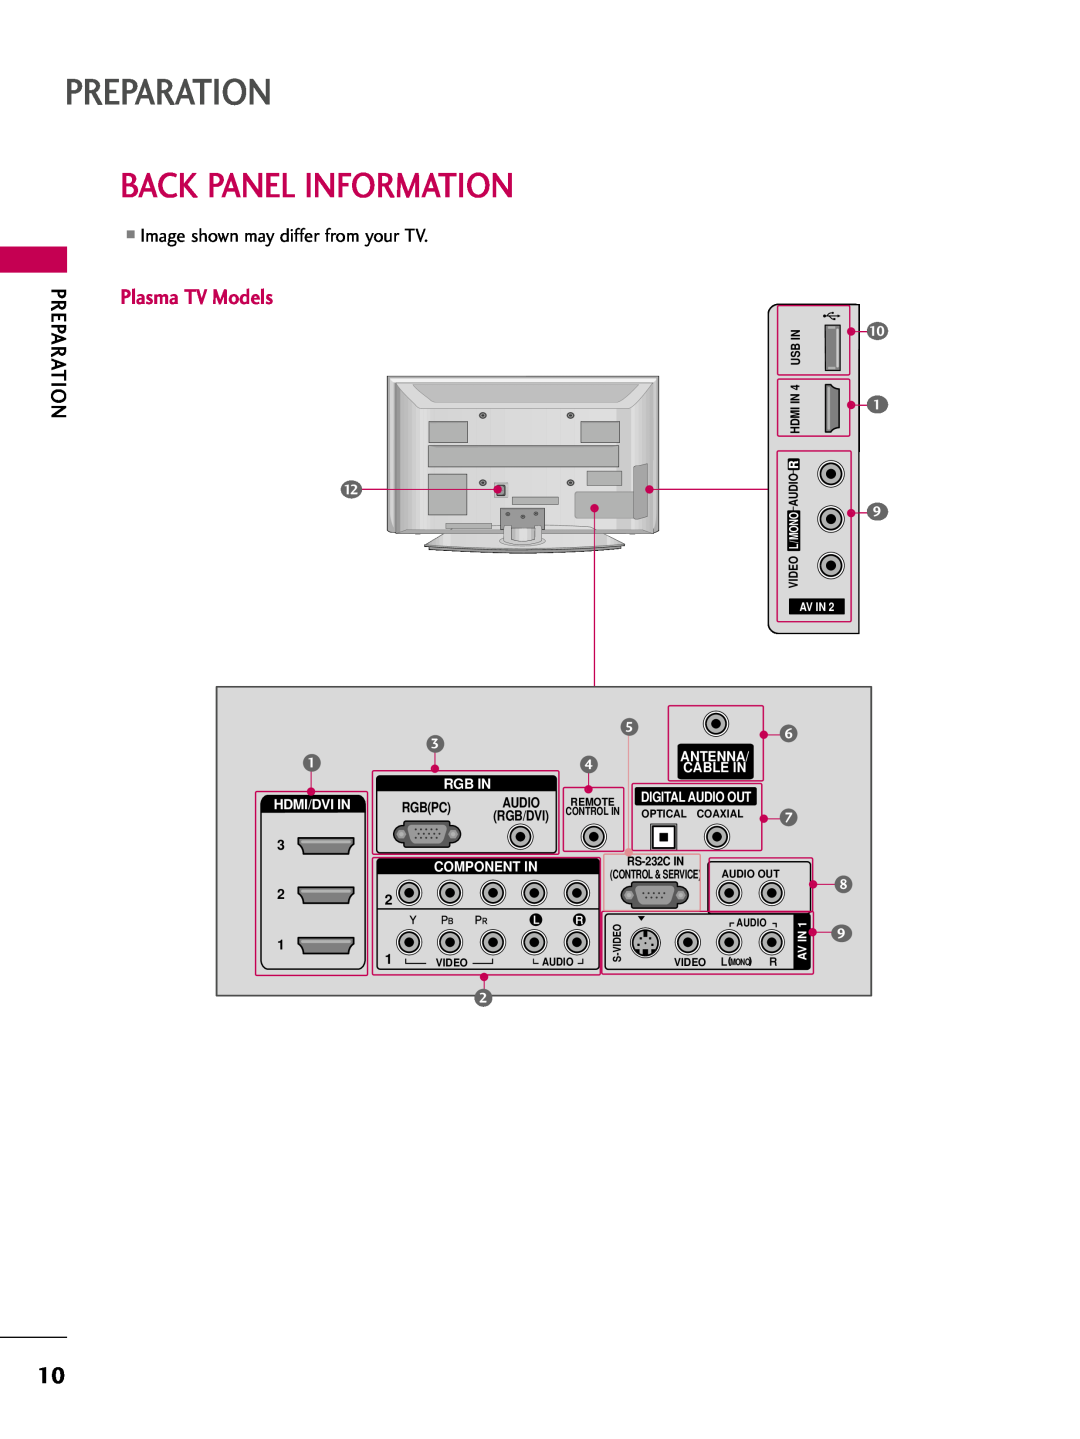 LG Electronics 3750 Back Panel Information, Preparation, Plasma TV Models, Antenna, Rgb In, Cable In, Digital Audio Out 